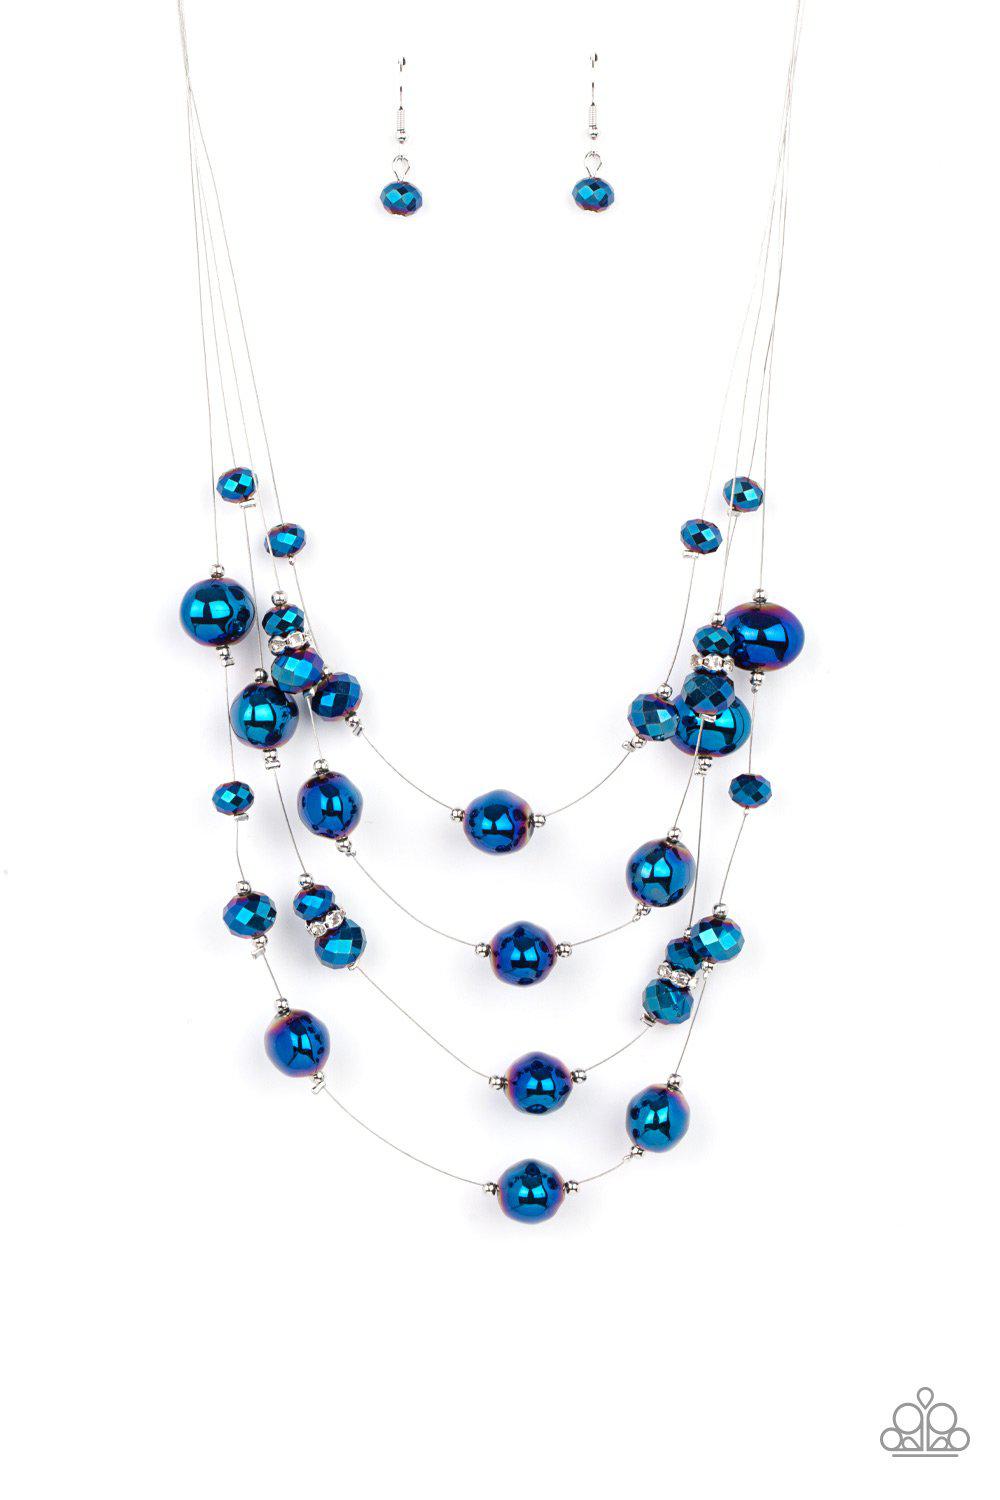 Cosmic Real Estate Metallic Blue &quot;Oil Spill&quot; Necklace - Paparazzi Accessories - free matching earrings - CarasShop.com - $5 Jewelry by Cara Jewels